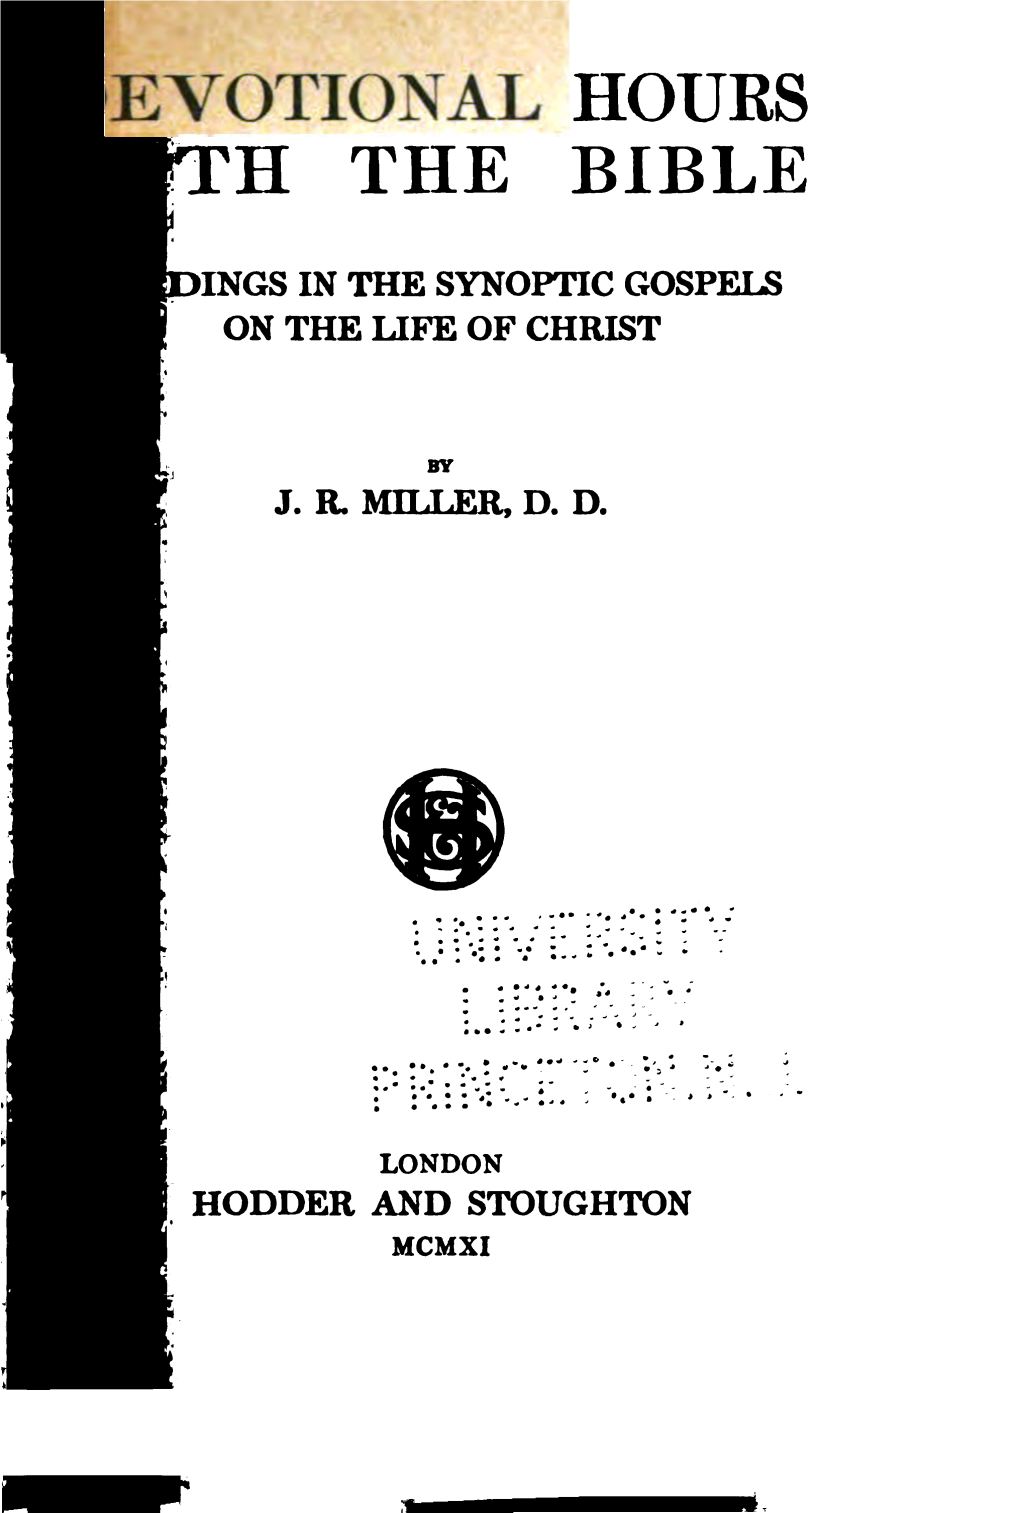 Readings in the Synoptic Gospels on the Life of Christ